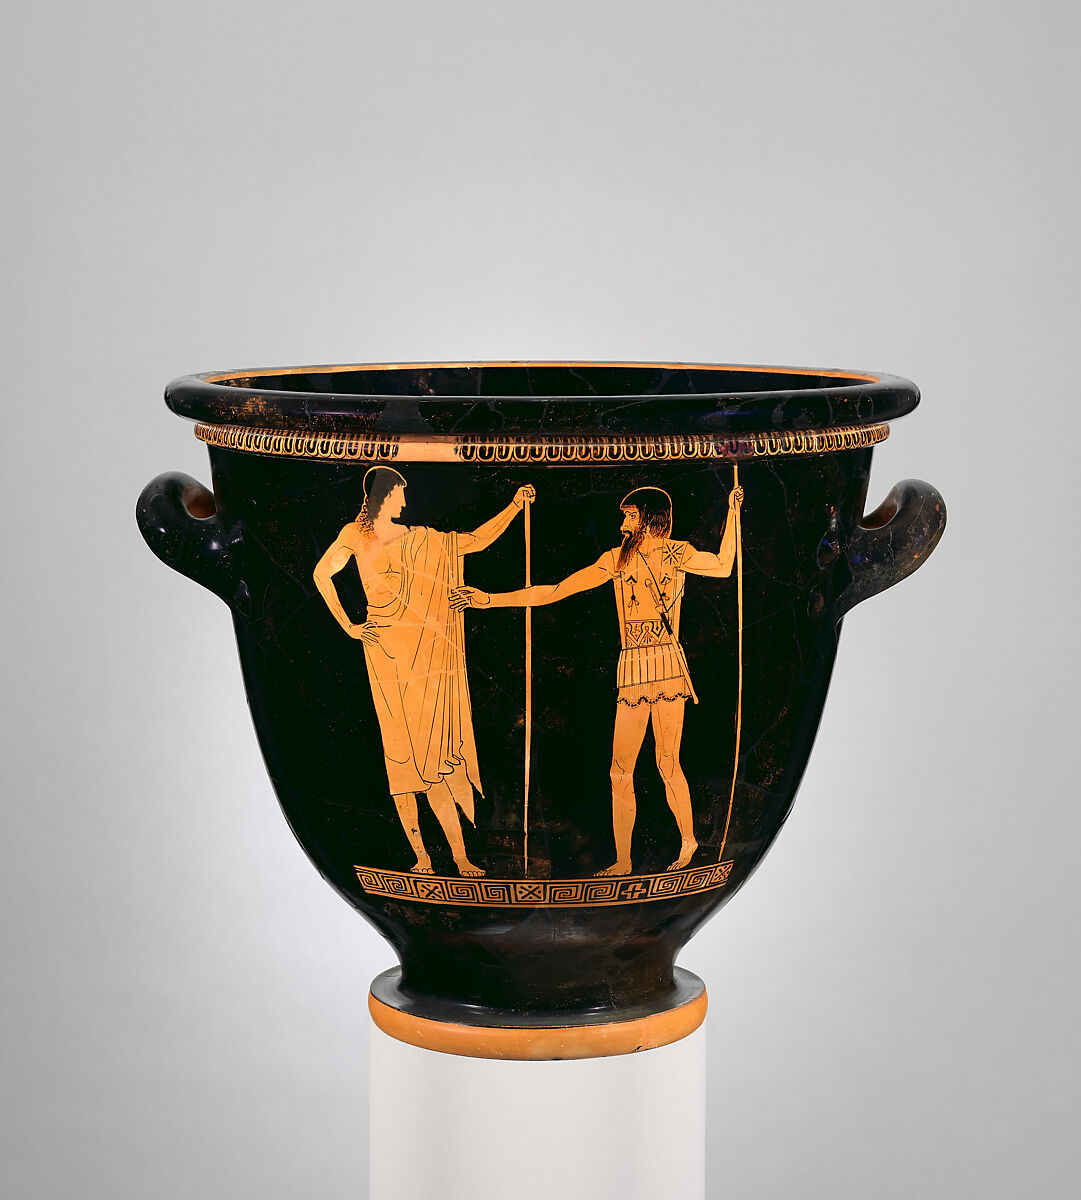 Terracotta bell-krater (bowl for mixing wine and water), Attributed to the Achilles Painter, Terracotta, Greek, Attic 